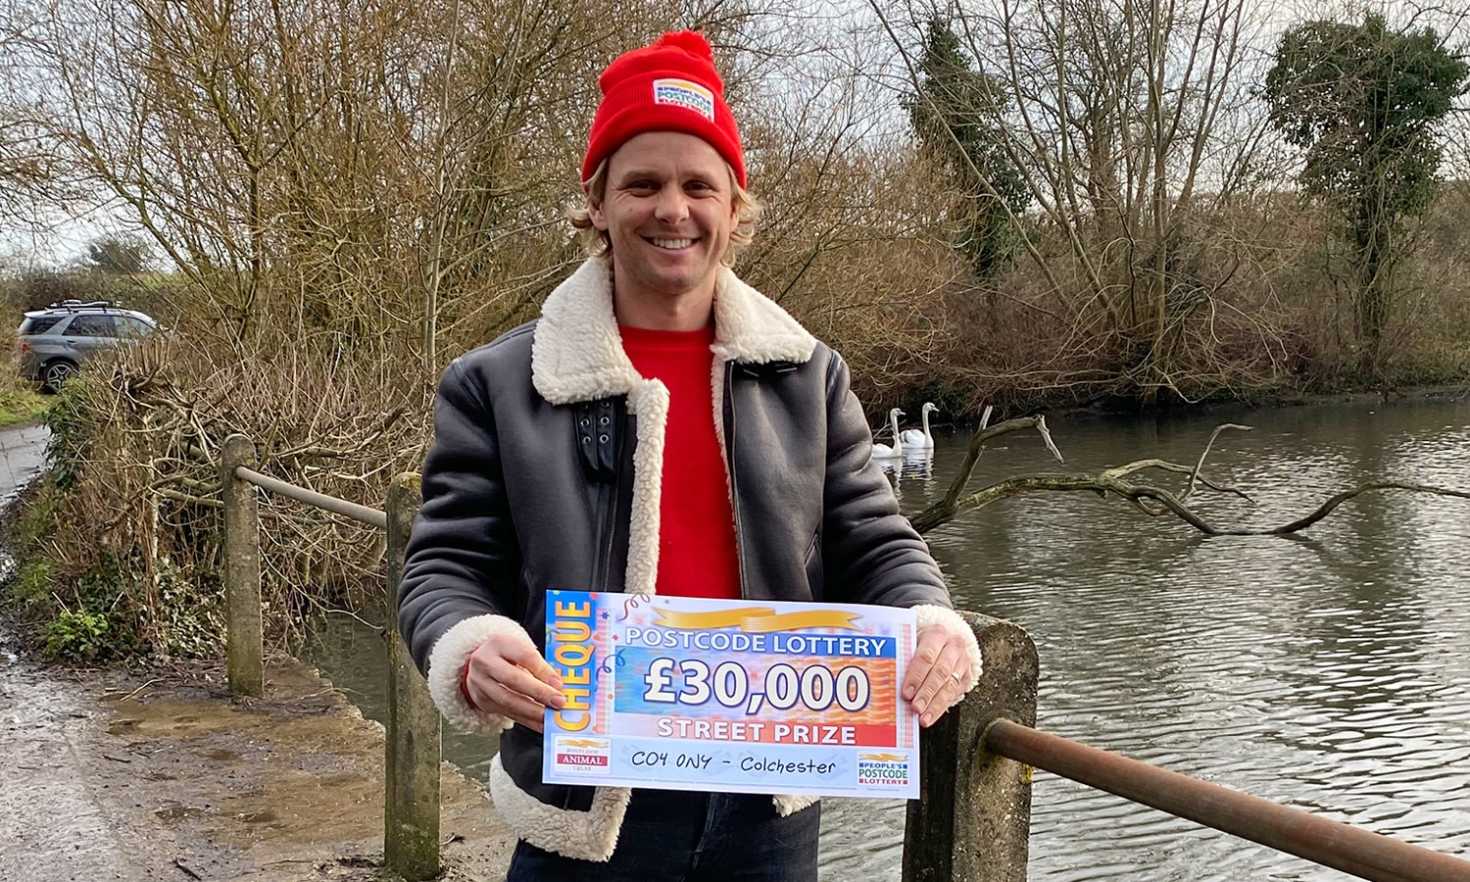 Jeff reveals thrilling £30,000 Street Prize wins for six lucky players in Colchester